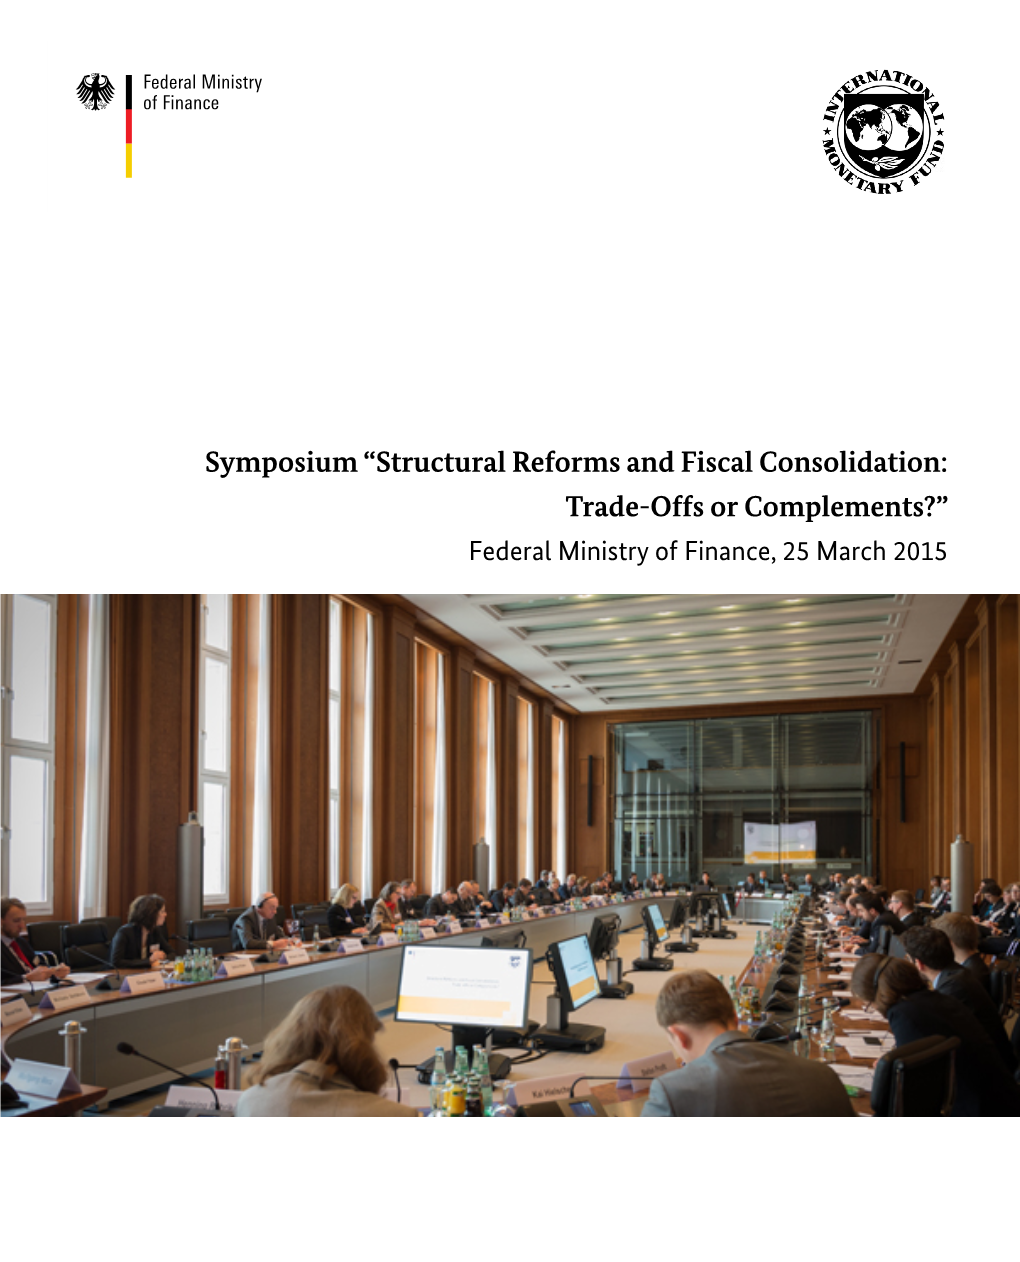 Symposium “Structural Reforms and Fiscal Consolidation: Trade-Offs Or Complements?” Federal Ministry of Finance, 25 March 2015